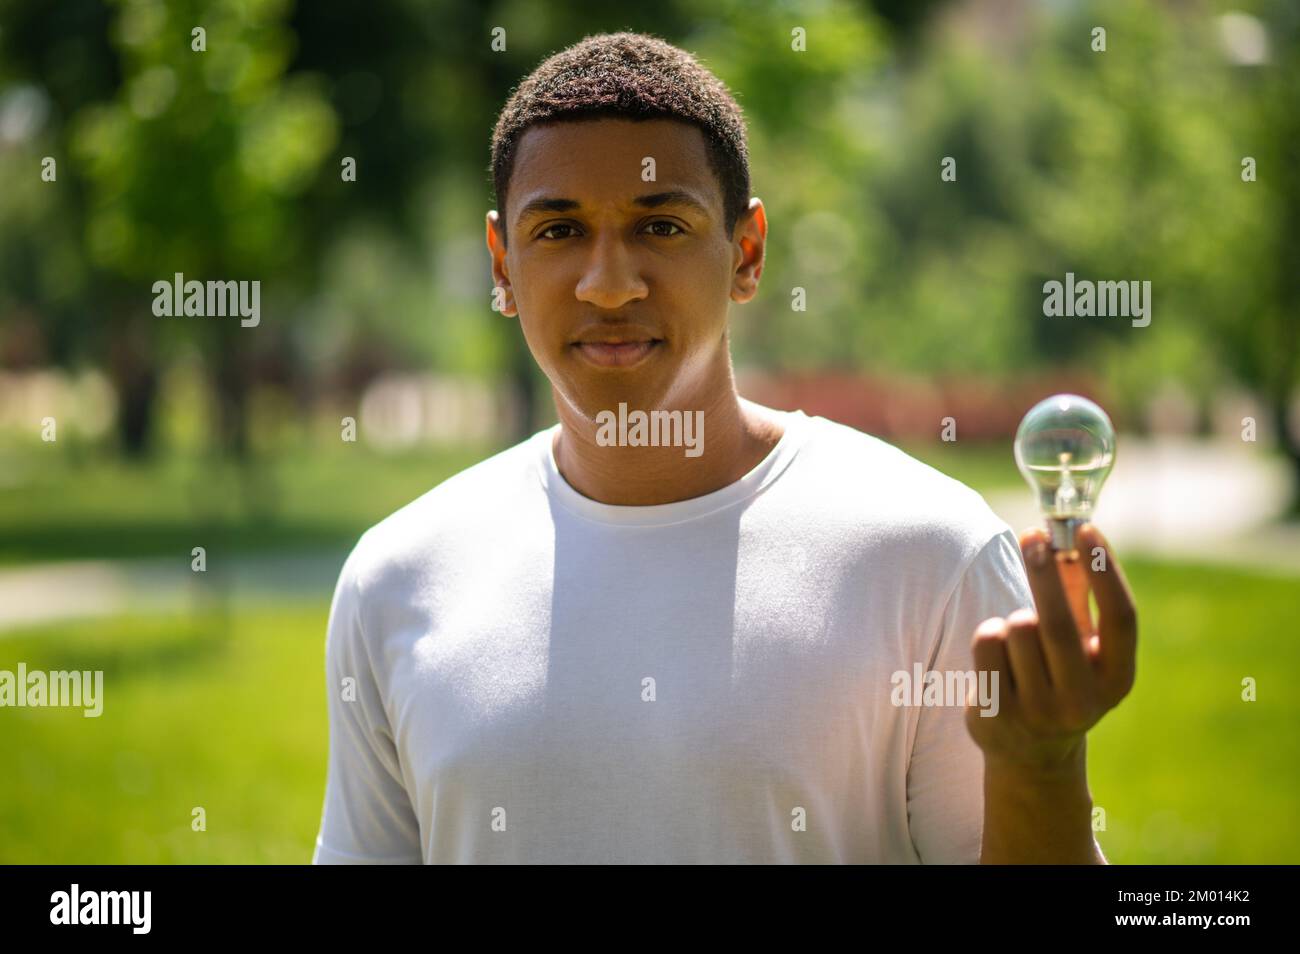 Protection of nature. Dark-skinned guy looking confidently at camera holding lightbulb standing in park on sunny day. Stock Photo